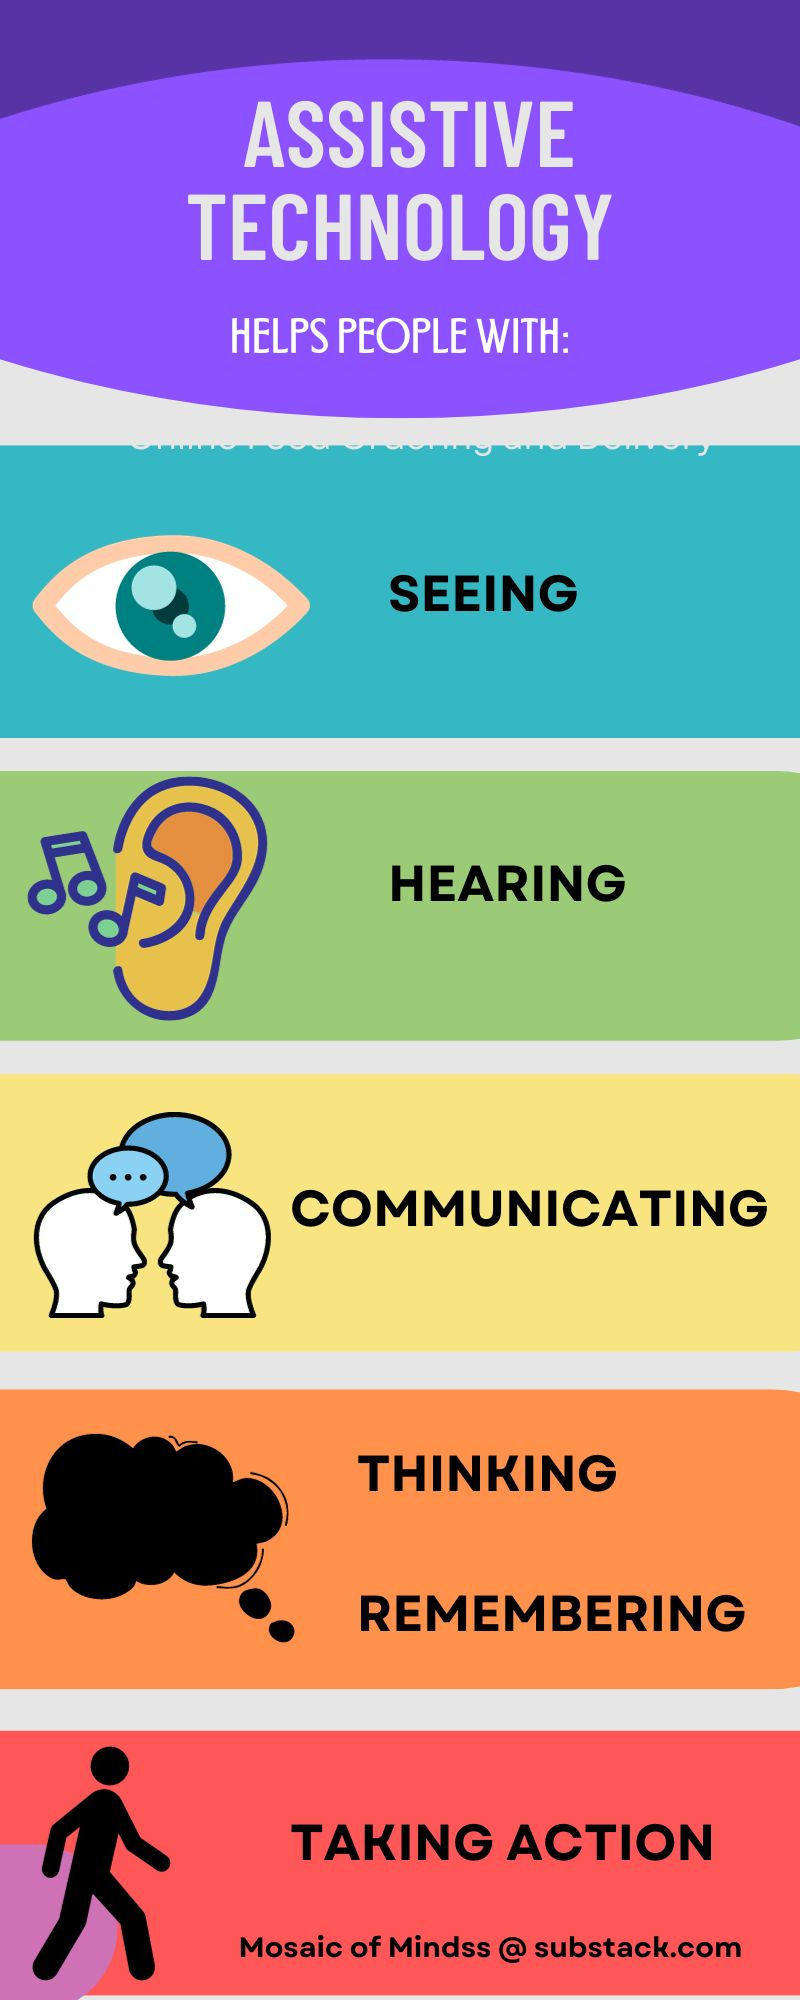 Infographic titled: Assistive Technology Helps People With" and lists seeing, hearing, communicating, thinking, remembering, and taking action.